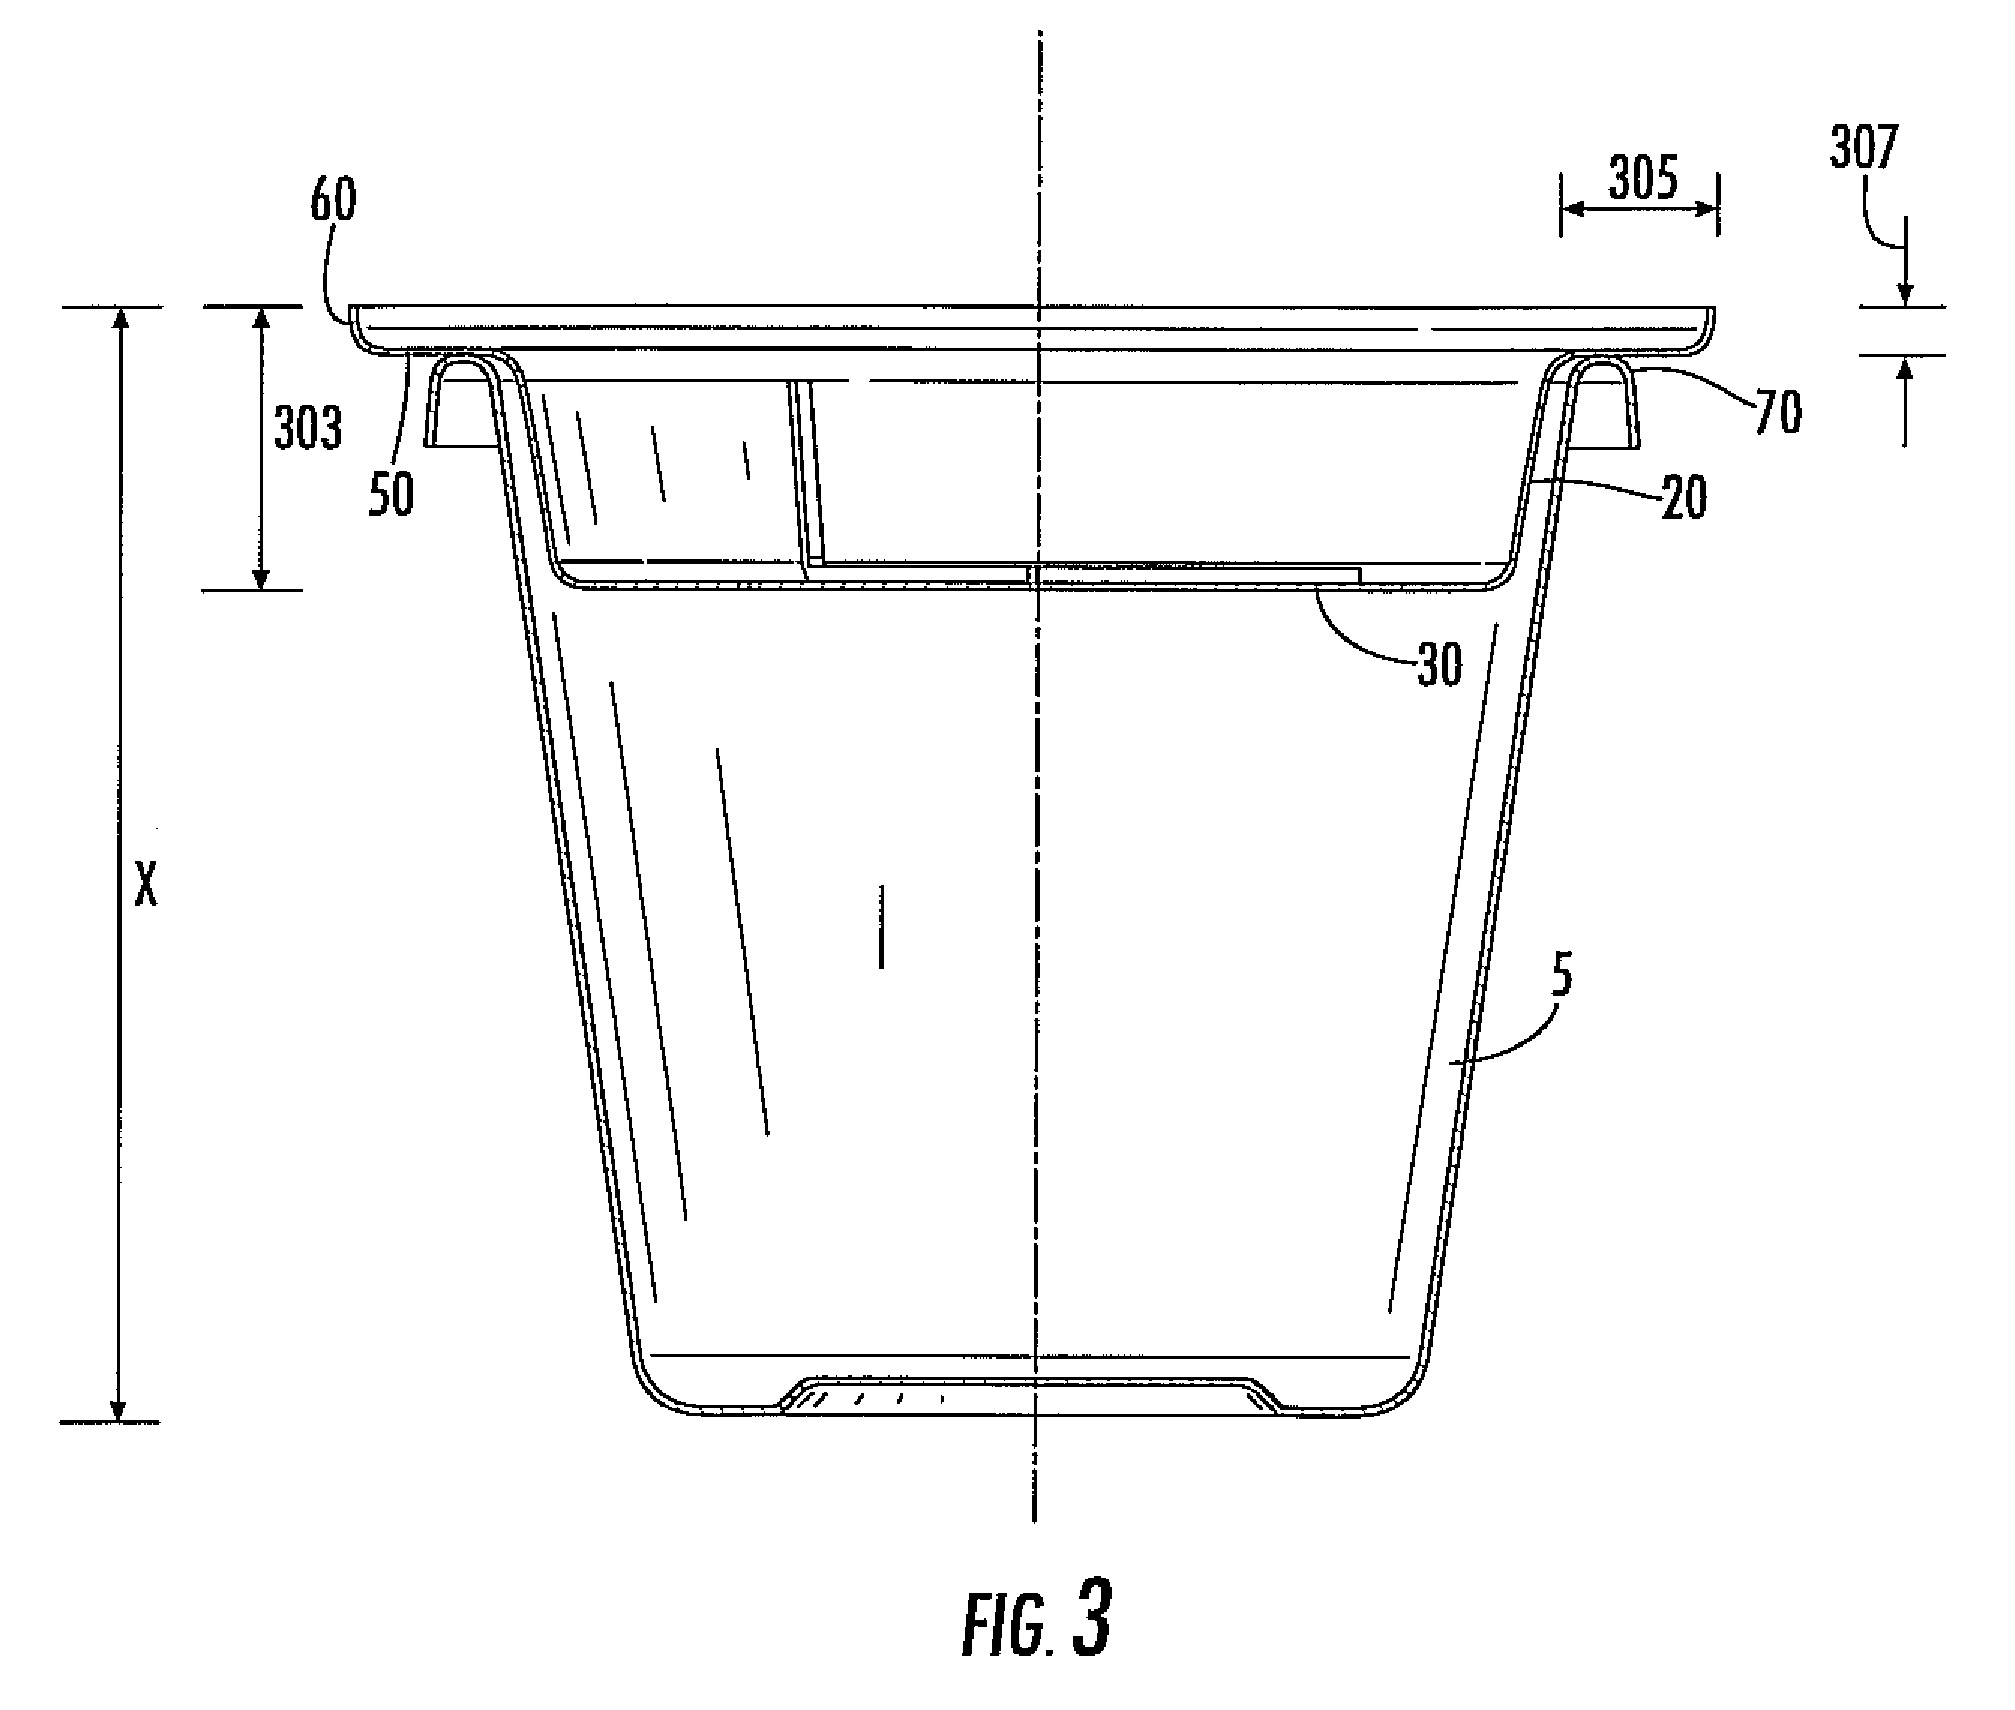 Suspended planting platform for a plant container